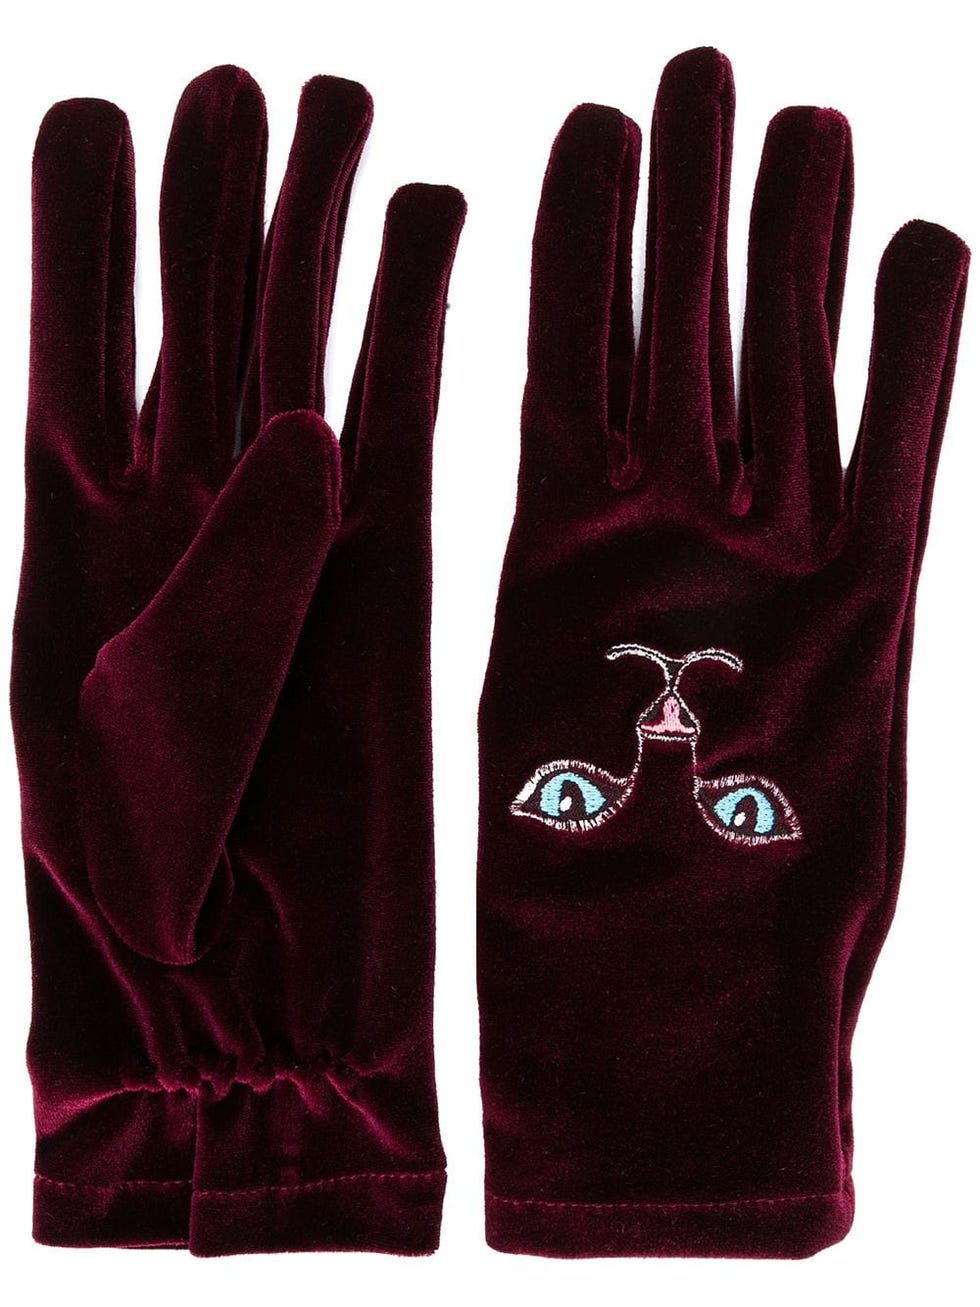 Glove, Personal protective equipment, Safety glove, Sports gear, Red, Maroon, Finger, Hand, Fashion accessory, Magenta, 